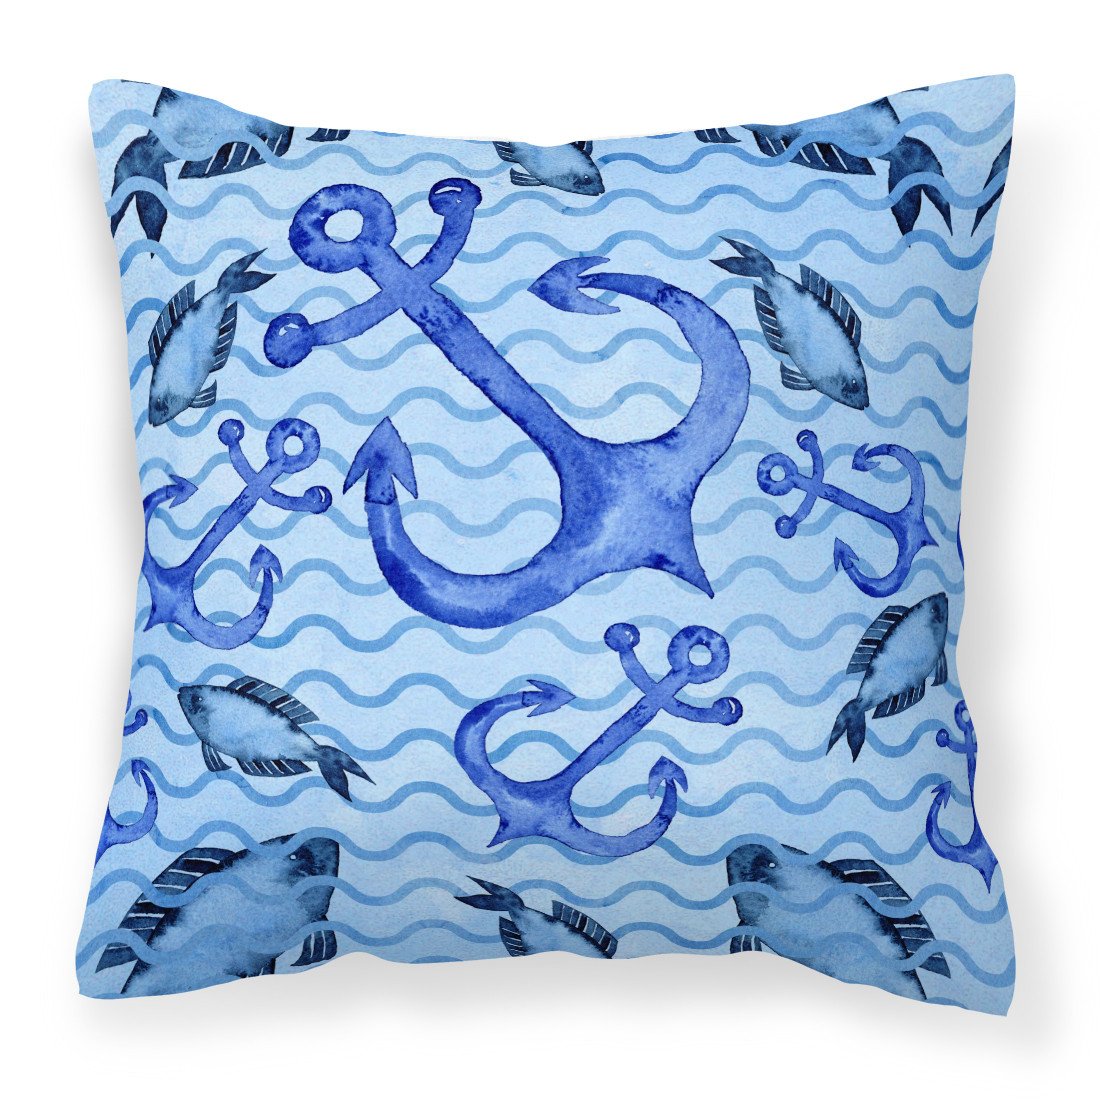 Beach Watercolor Anchors and Fish Fabric Decorative Pillow BB7534PW1818 by Caroline's Treasures